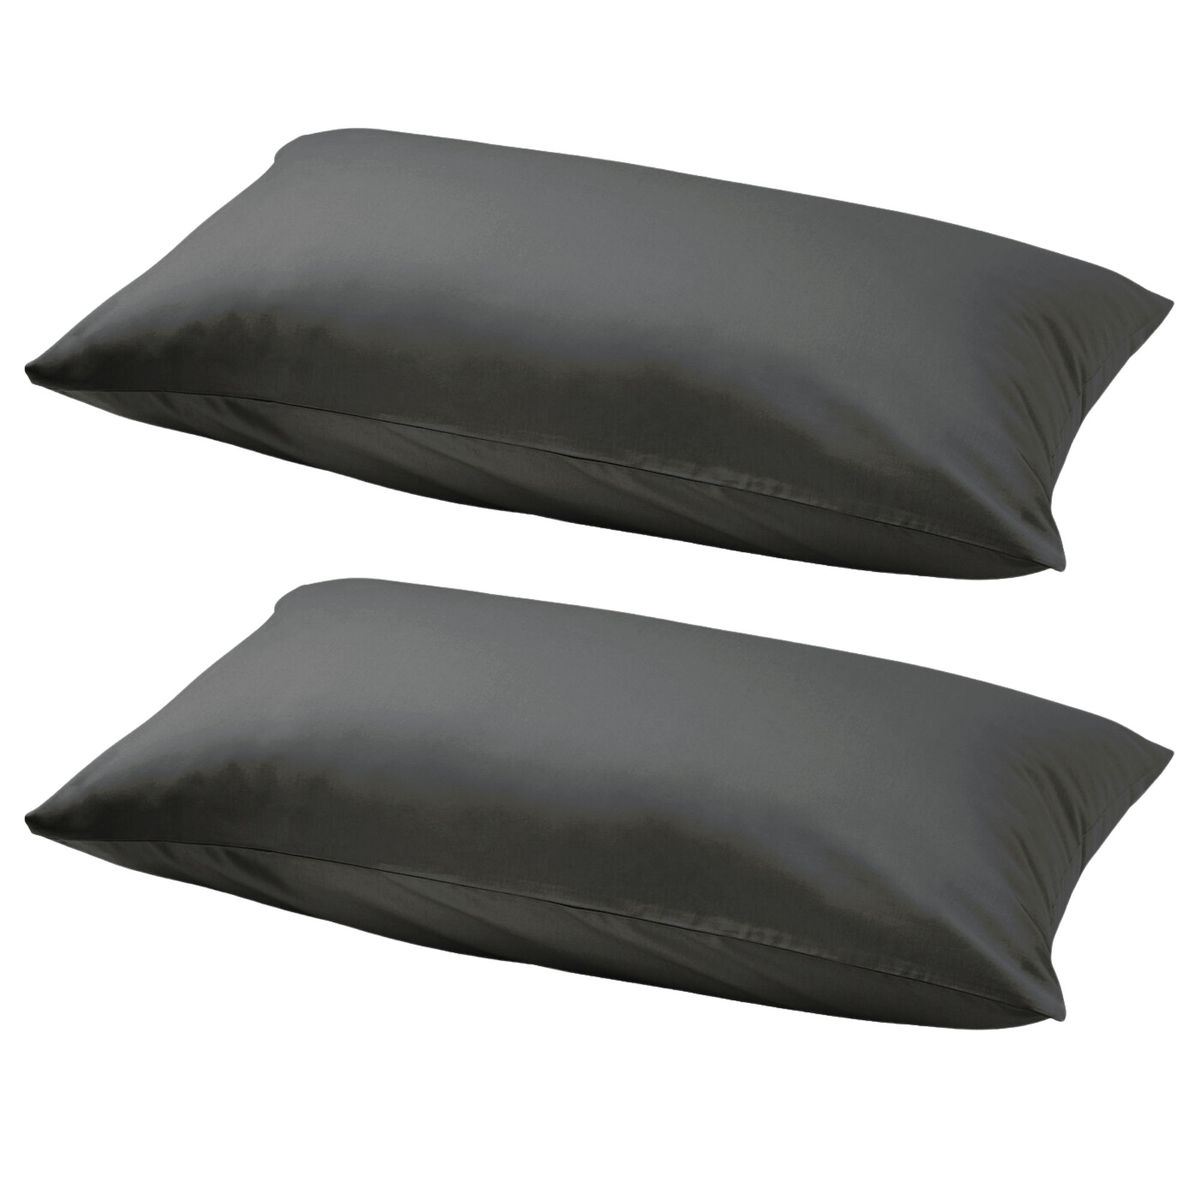 Lush Living - Pillow Cases Twin Pack - Microfibre - Grey